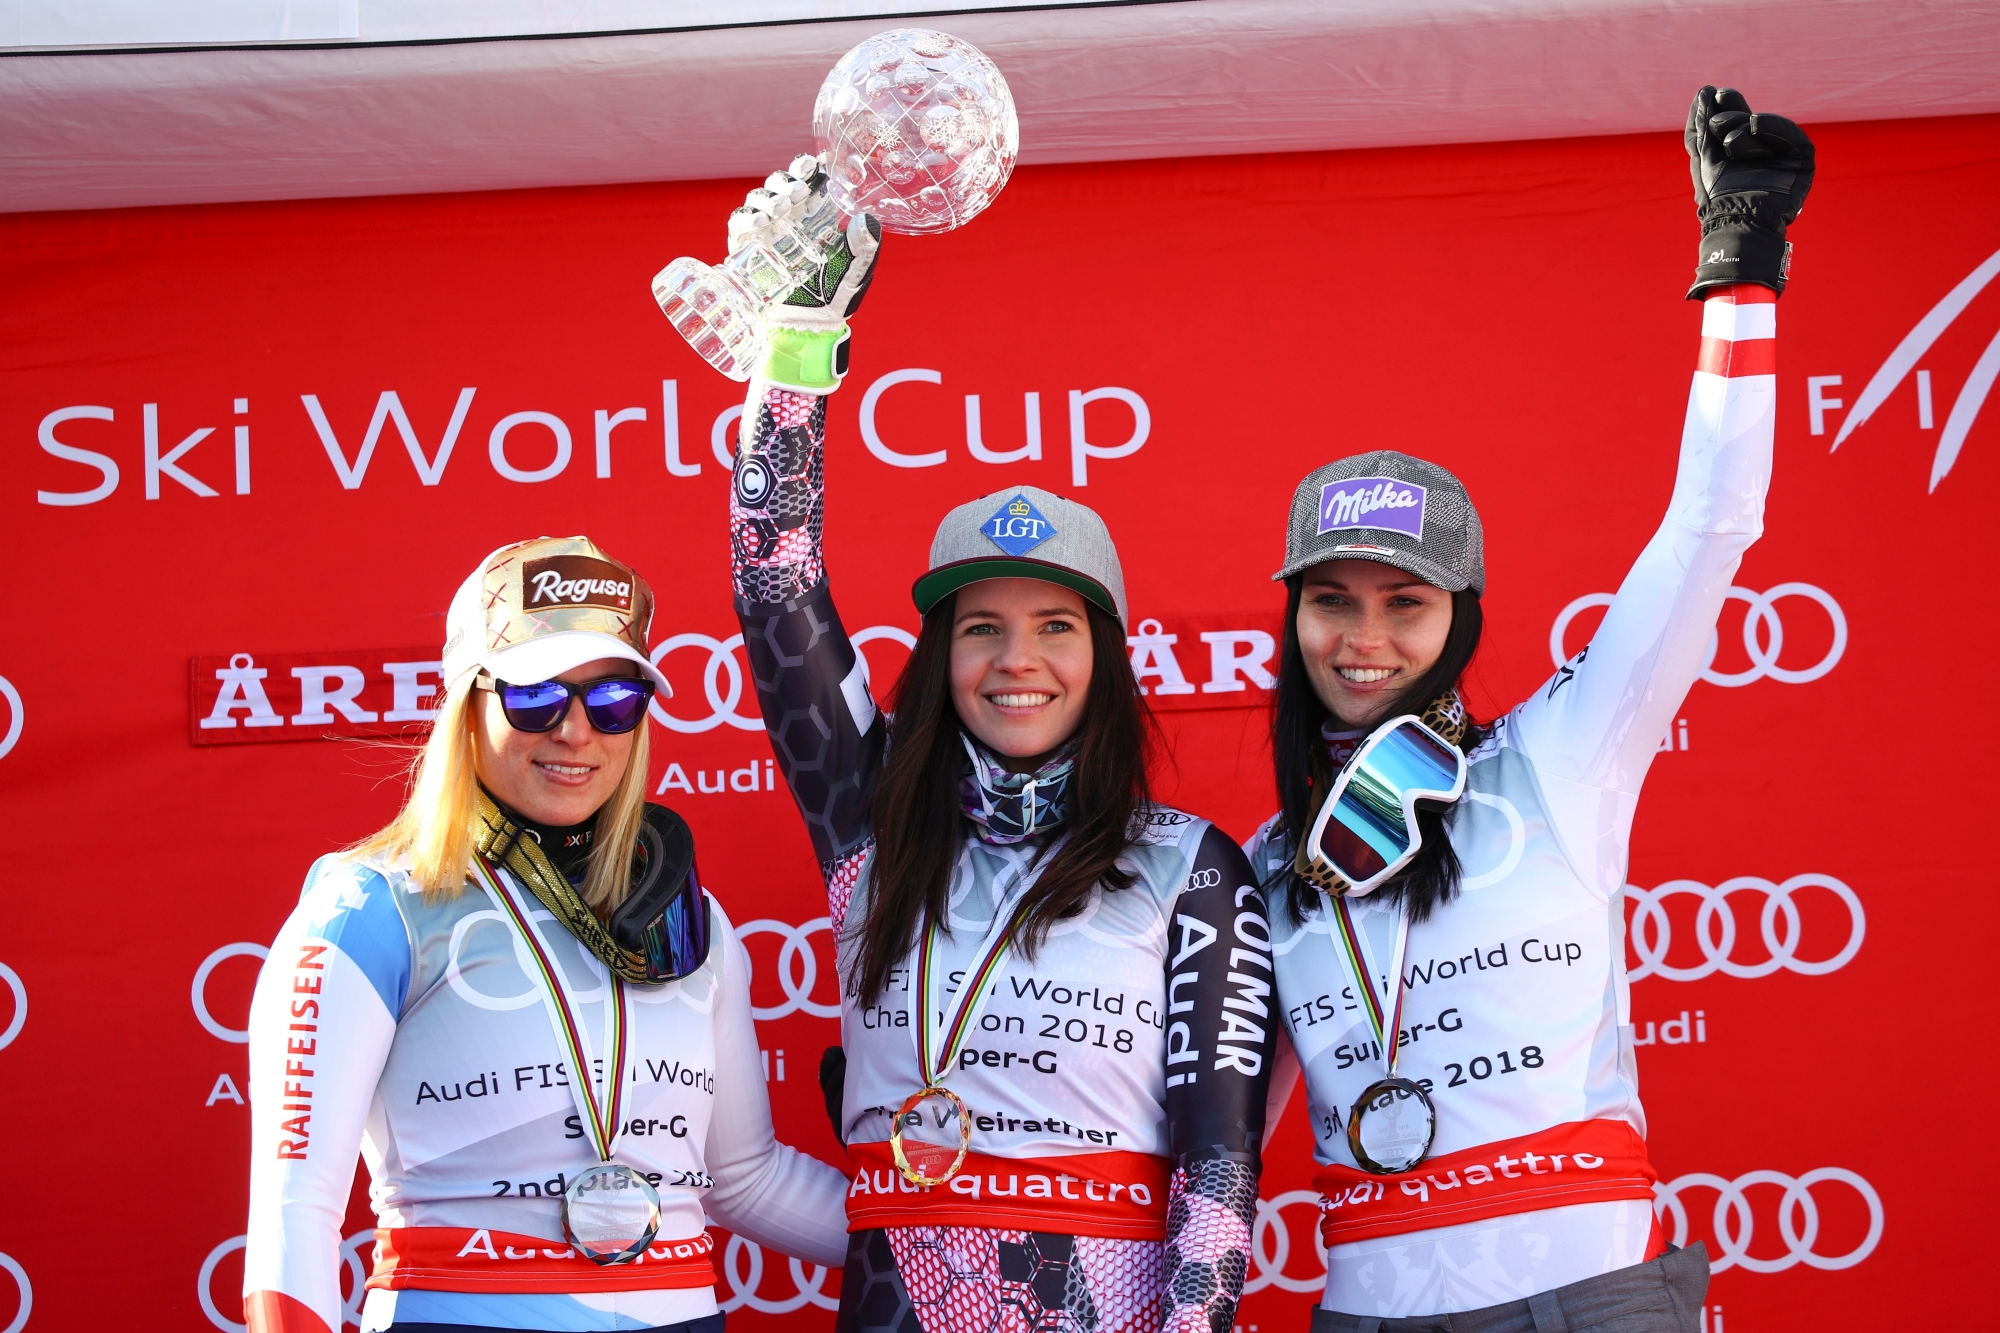 Liechtenstein's Tina Weirather, center, holds the women's World Cup super-G discipline trophy, flanked by second placed Switzerland's Lara Gut, left, and third placed Austria's Anna Veith, at the alpine ski World Cup finals in Are, Sweden, Thursday, March 15, 2018. (AP Photo/Marco Trovati) Sweden Alpine Skiing World Cup